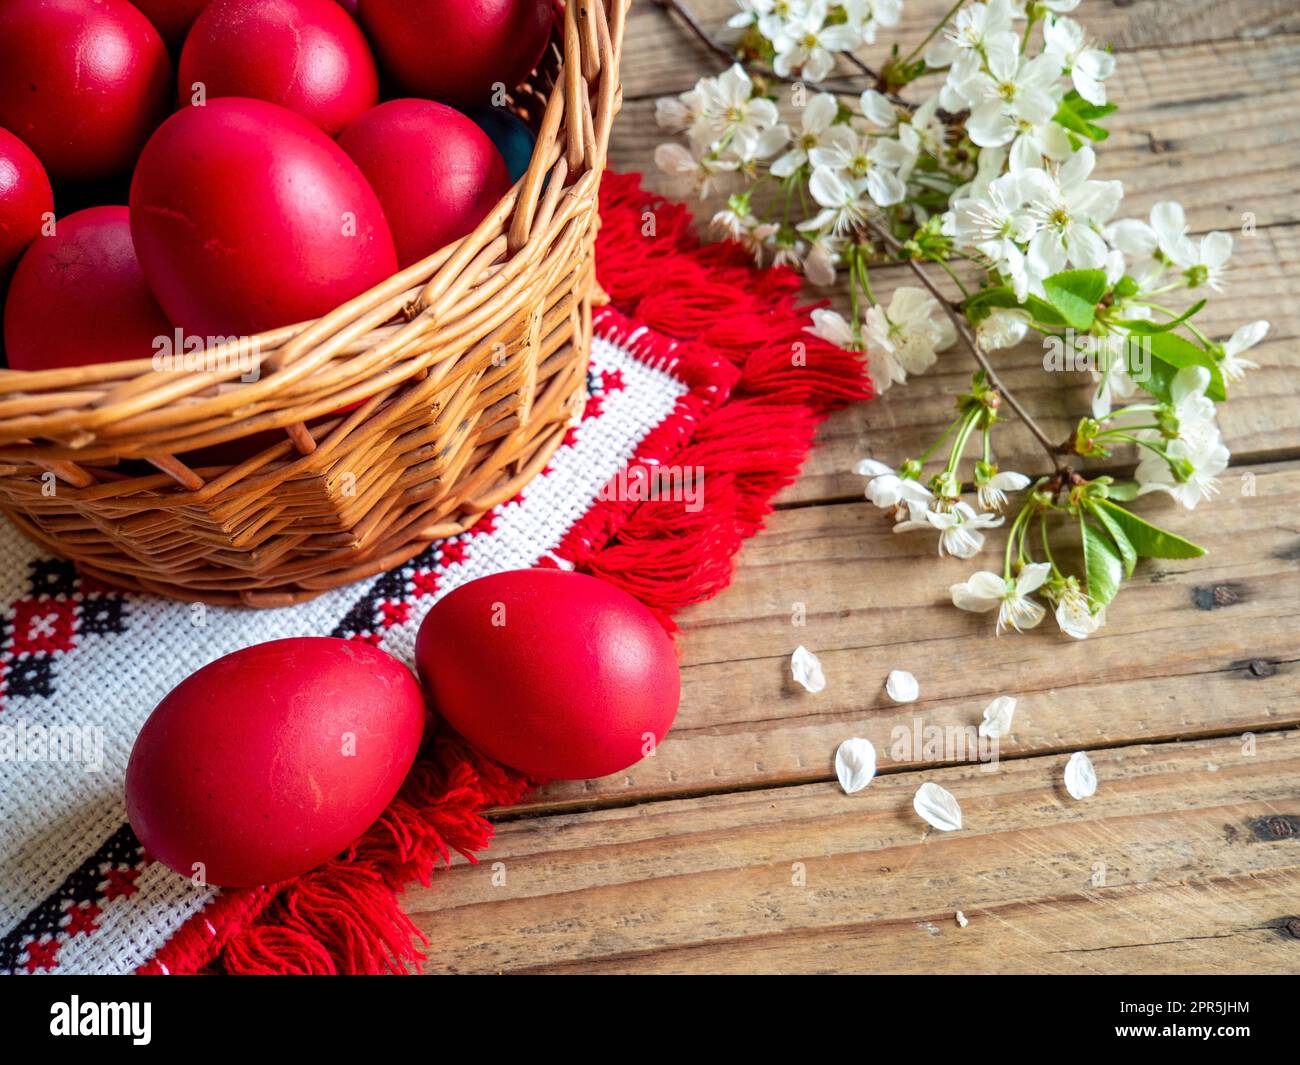 basket of red Easter eggs next to flowering branches on wooden table Stock Photo